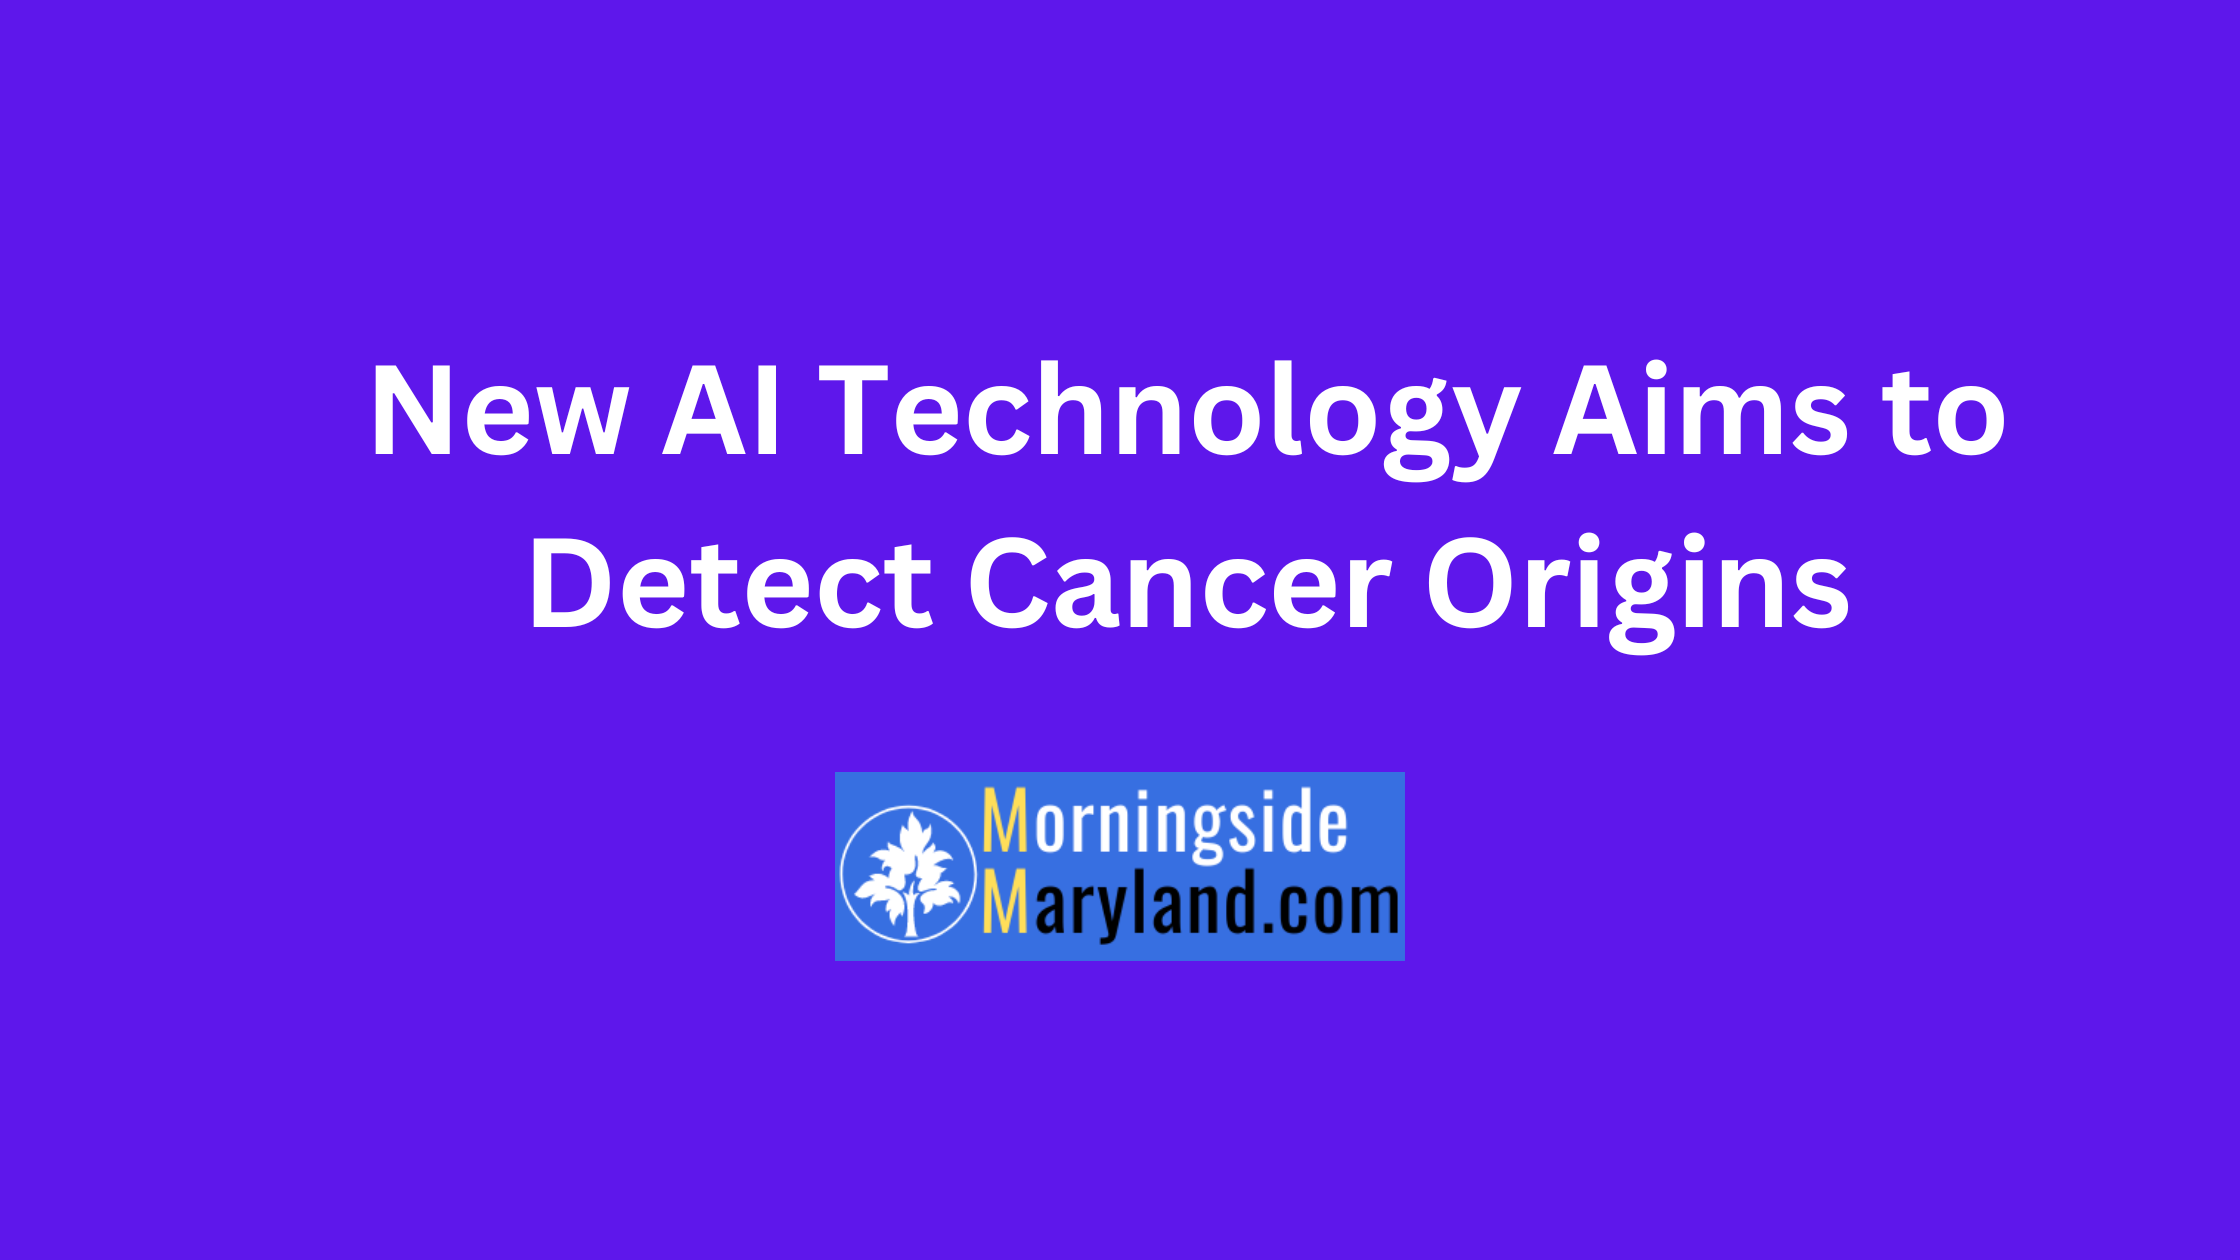 New AI Technology Aims to Detect Cancer Origins